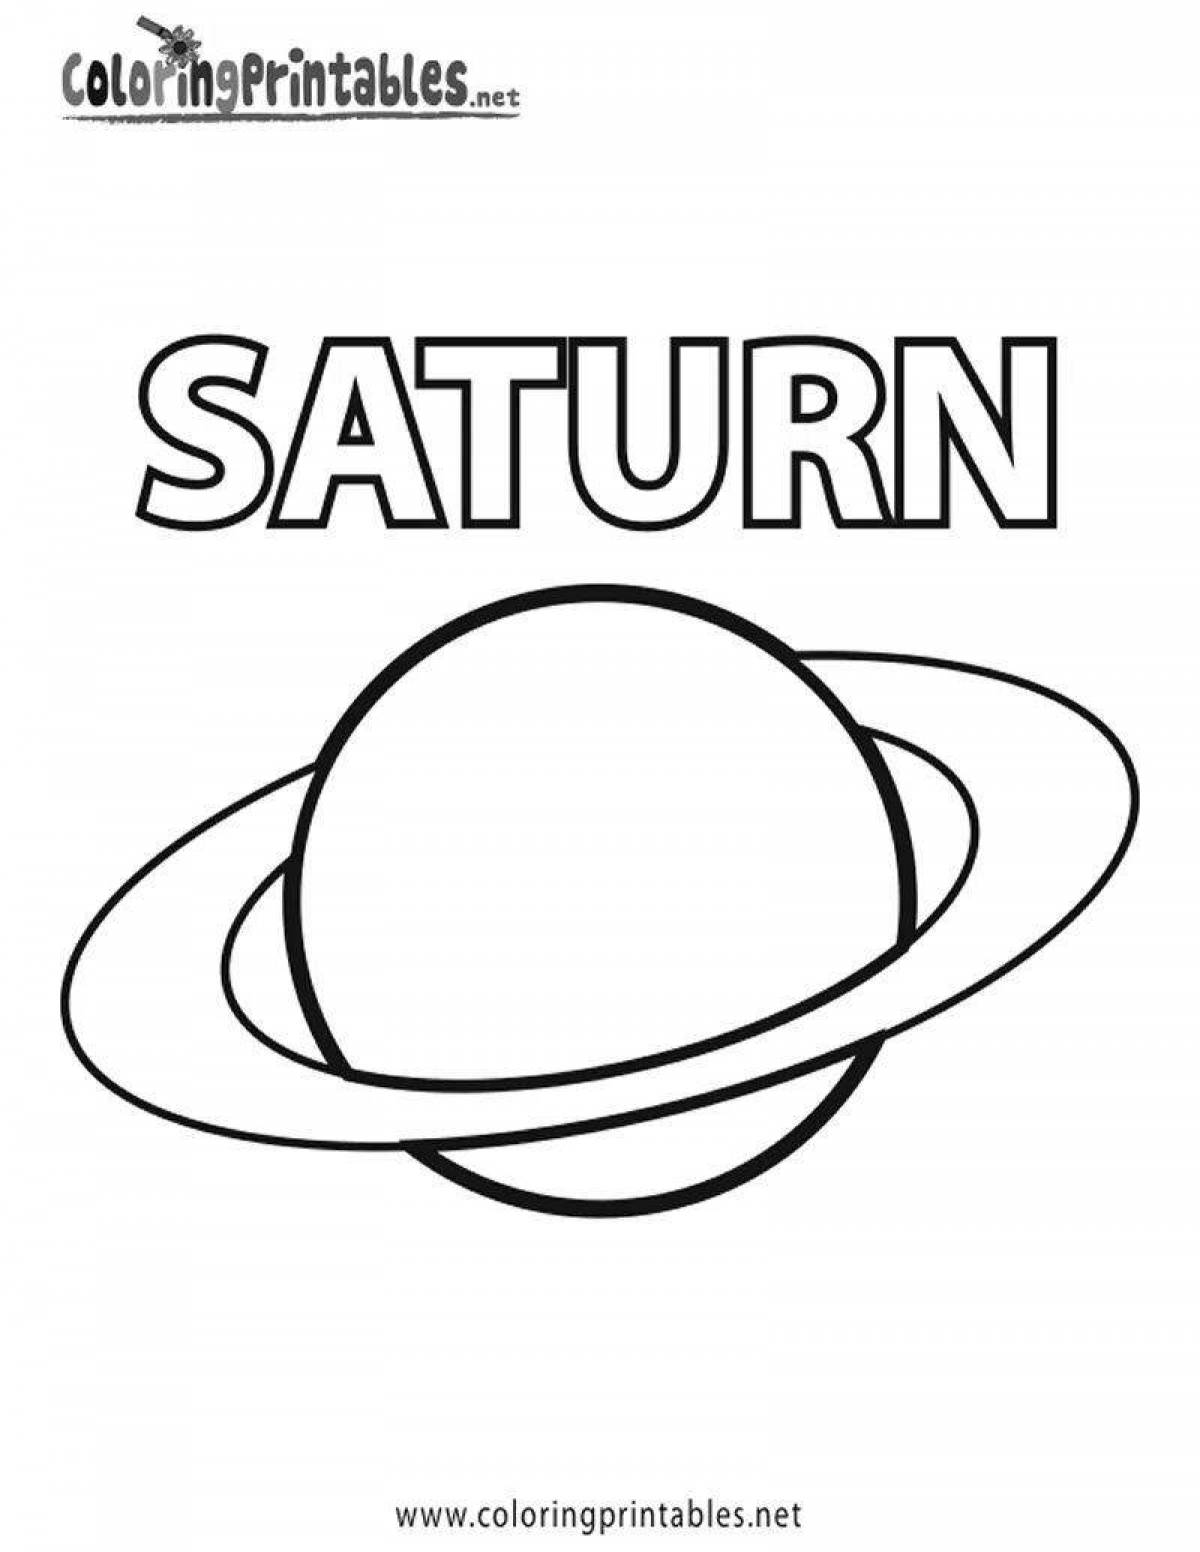 Bright coloring planet saturn